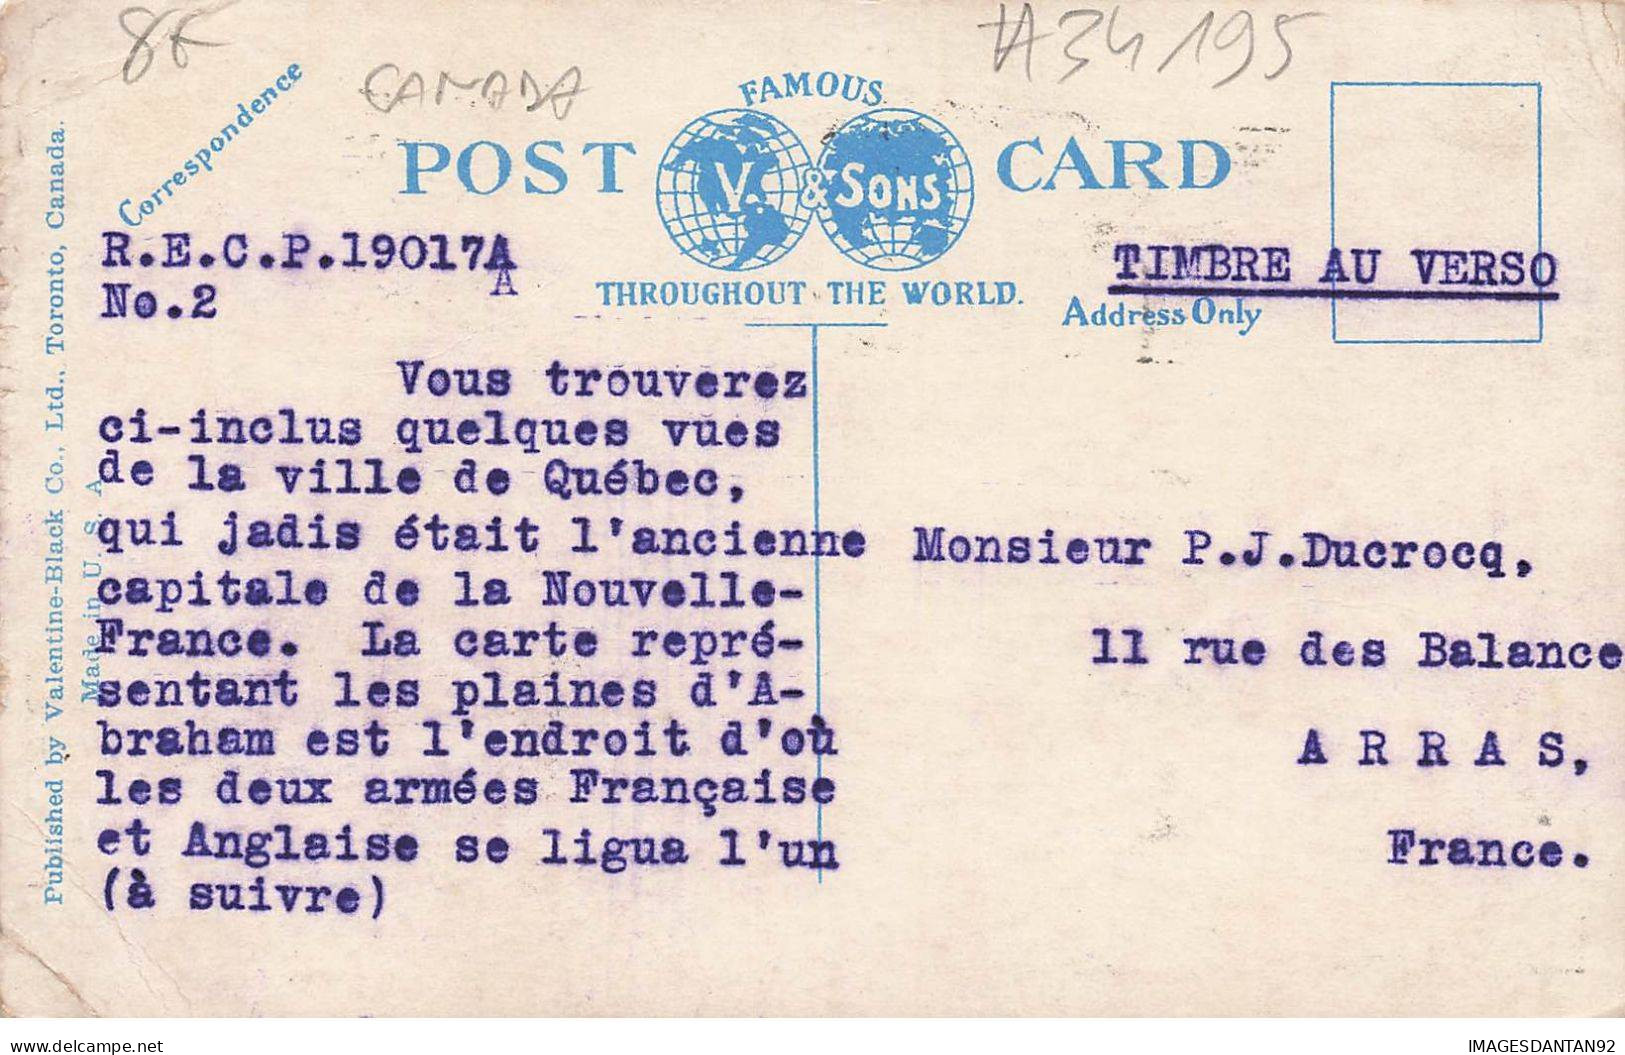 CANADA #MK34195 QUEBEC C.P.R STATION - Other & Unclassified